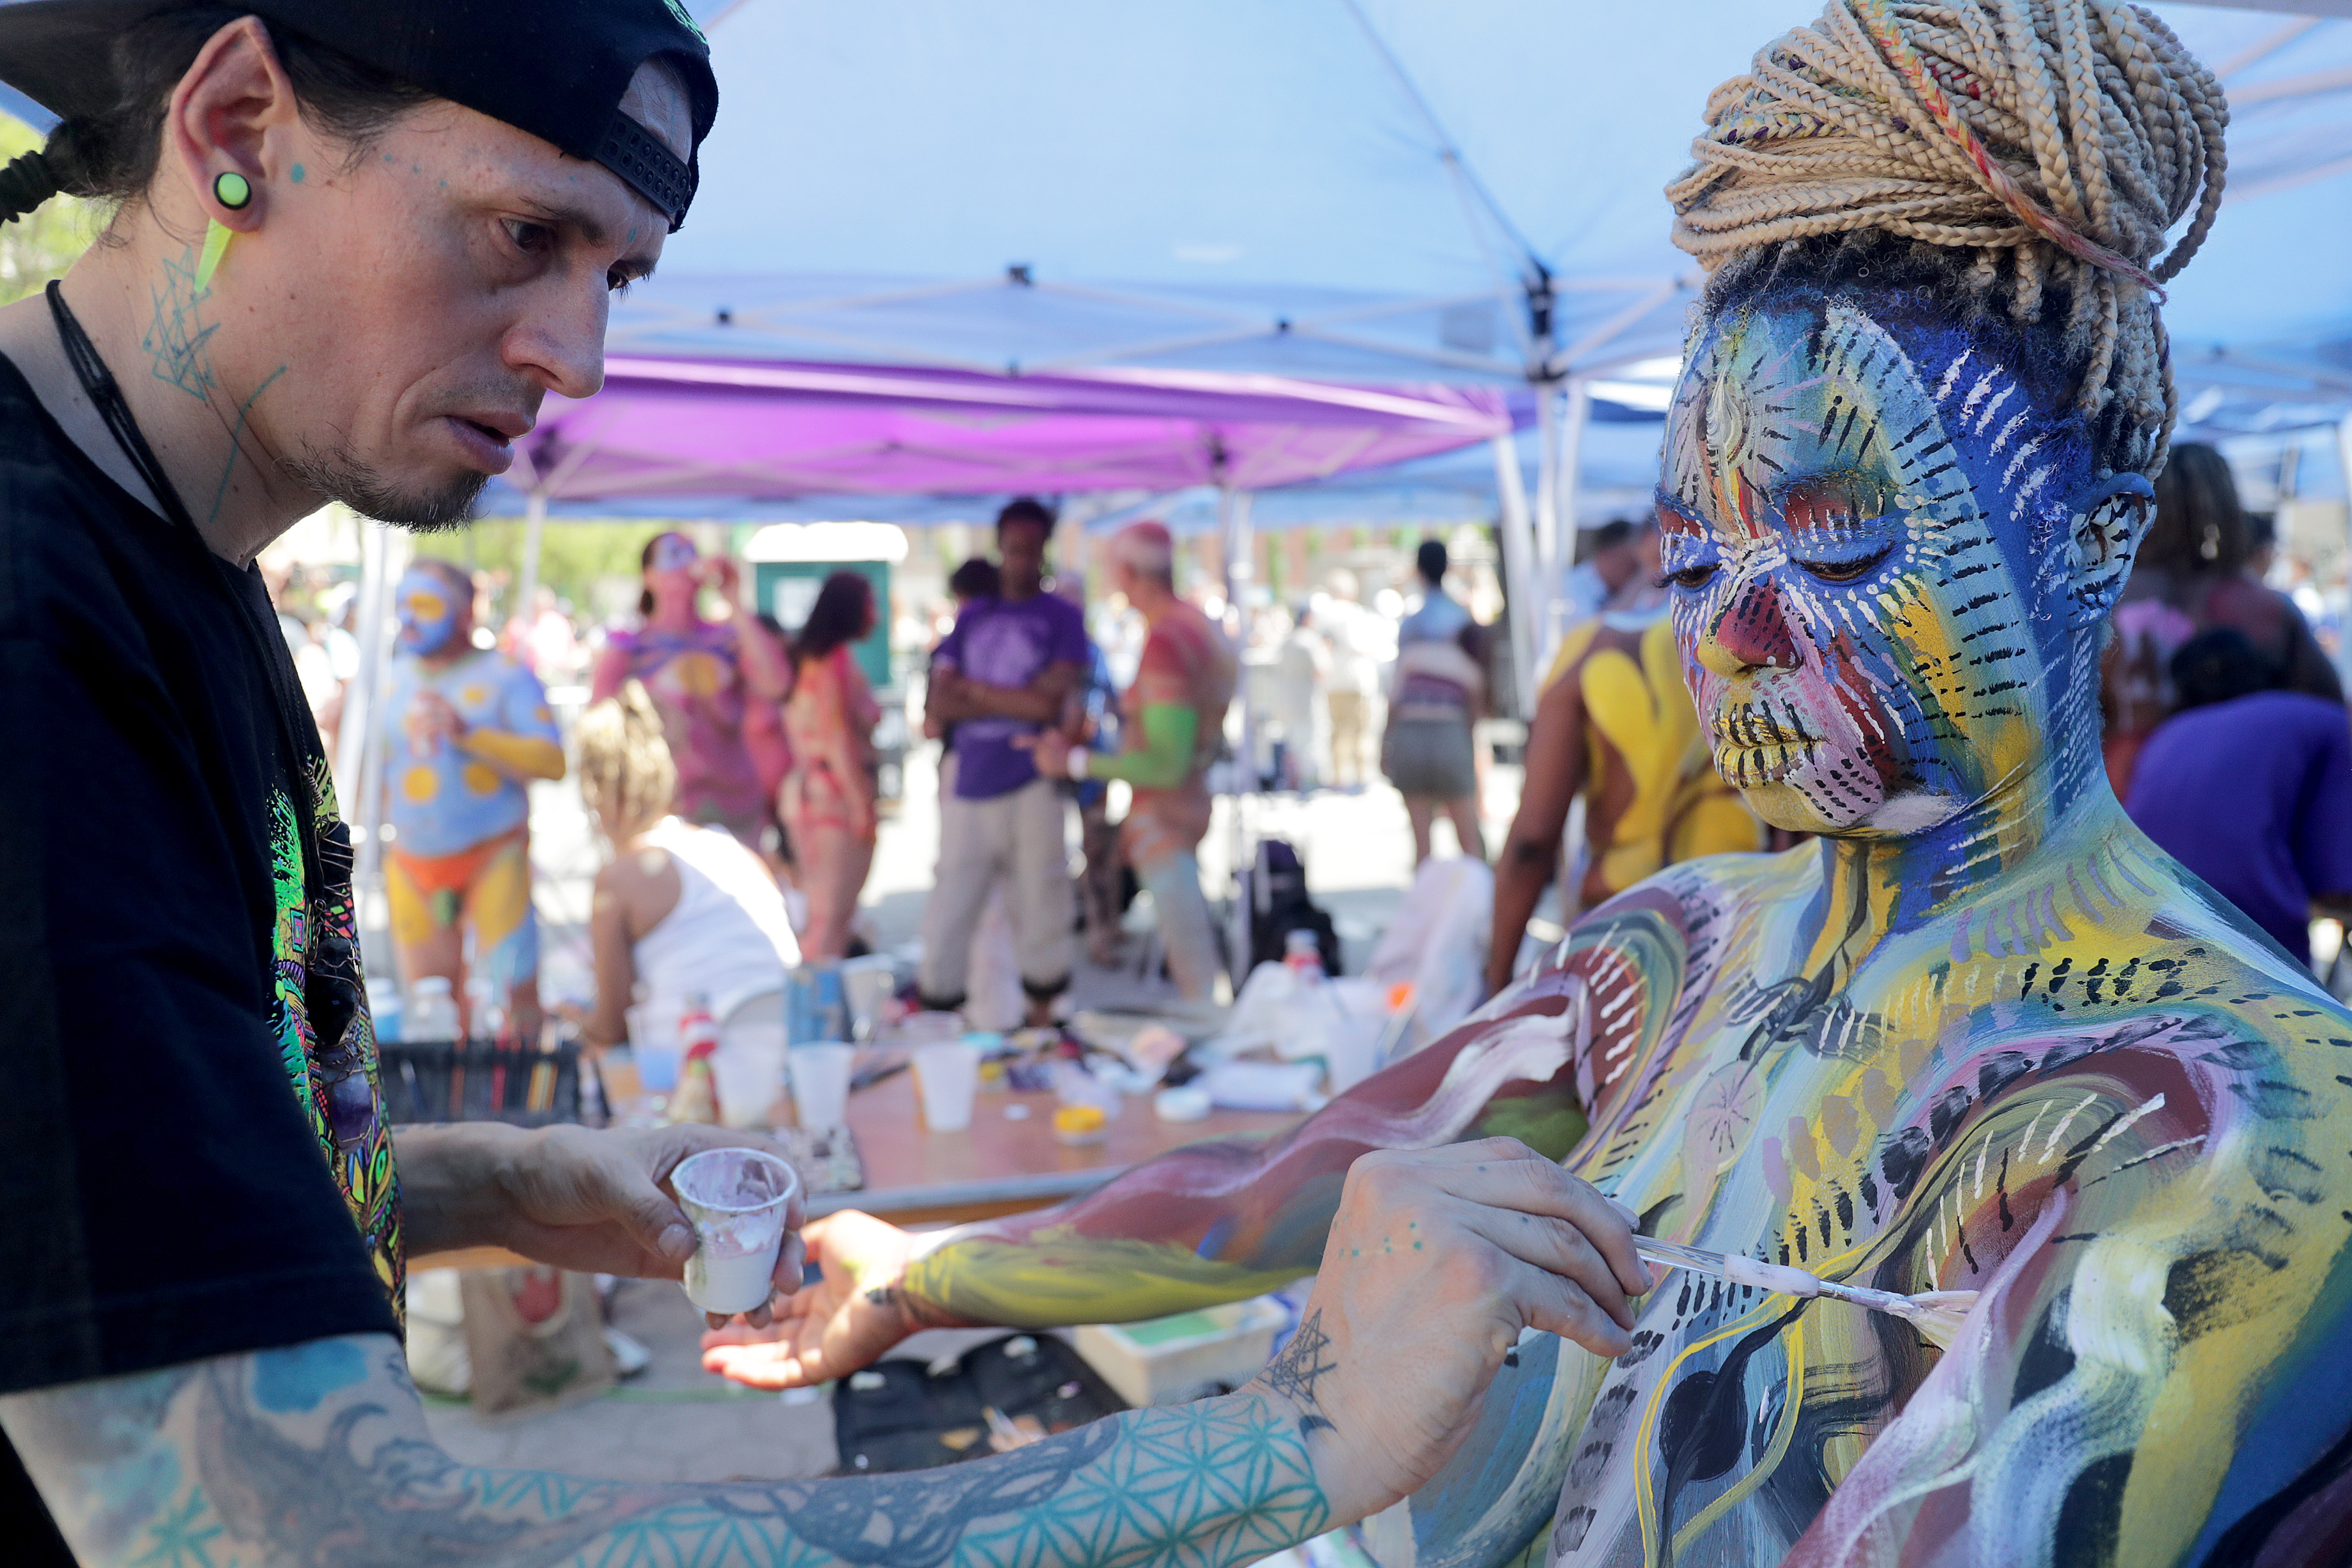 NYC Naked Bodypainting Day 2022 – New York Daily News